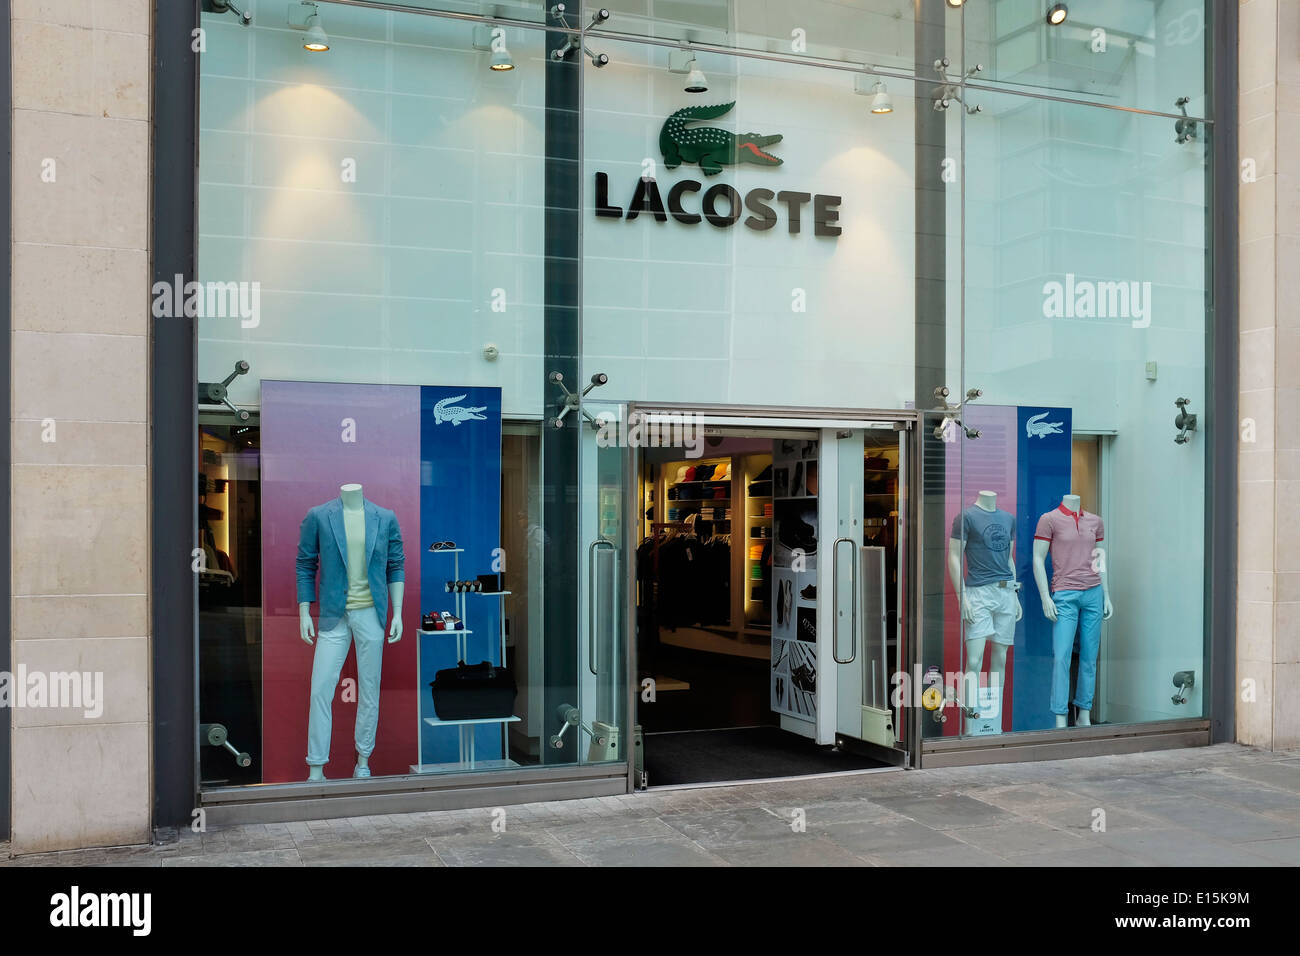 Lacoste store front in Manchester city centre UK Stock Photo